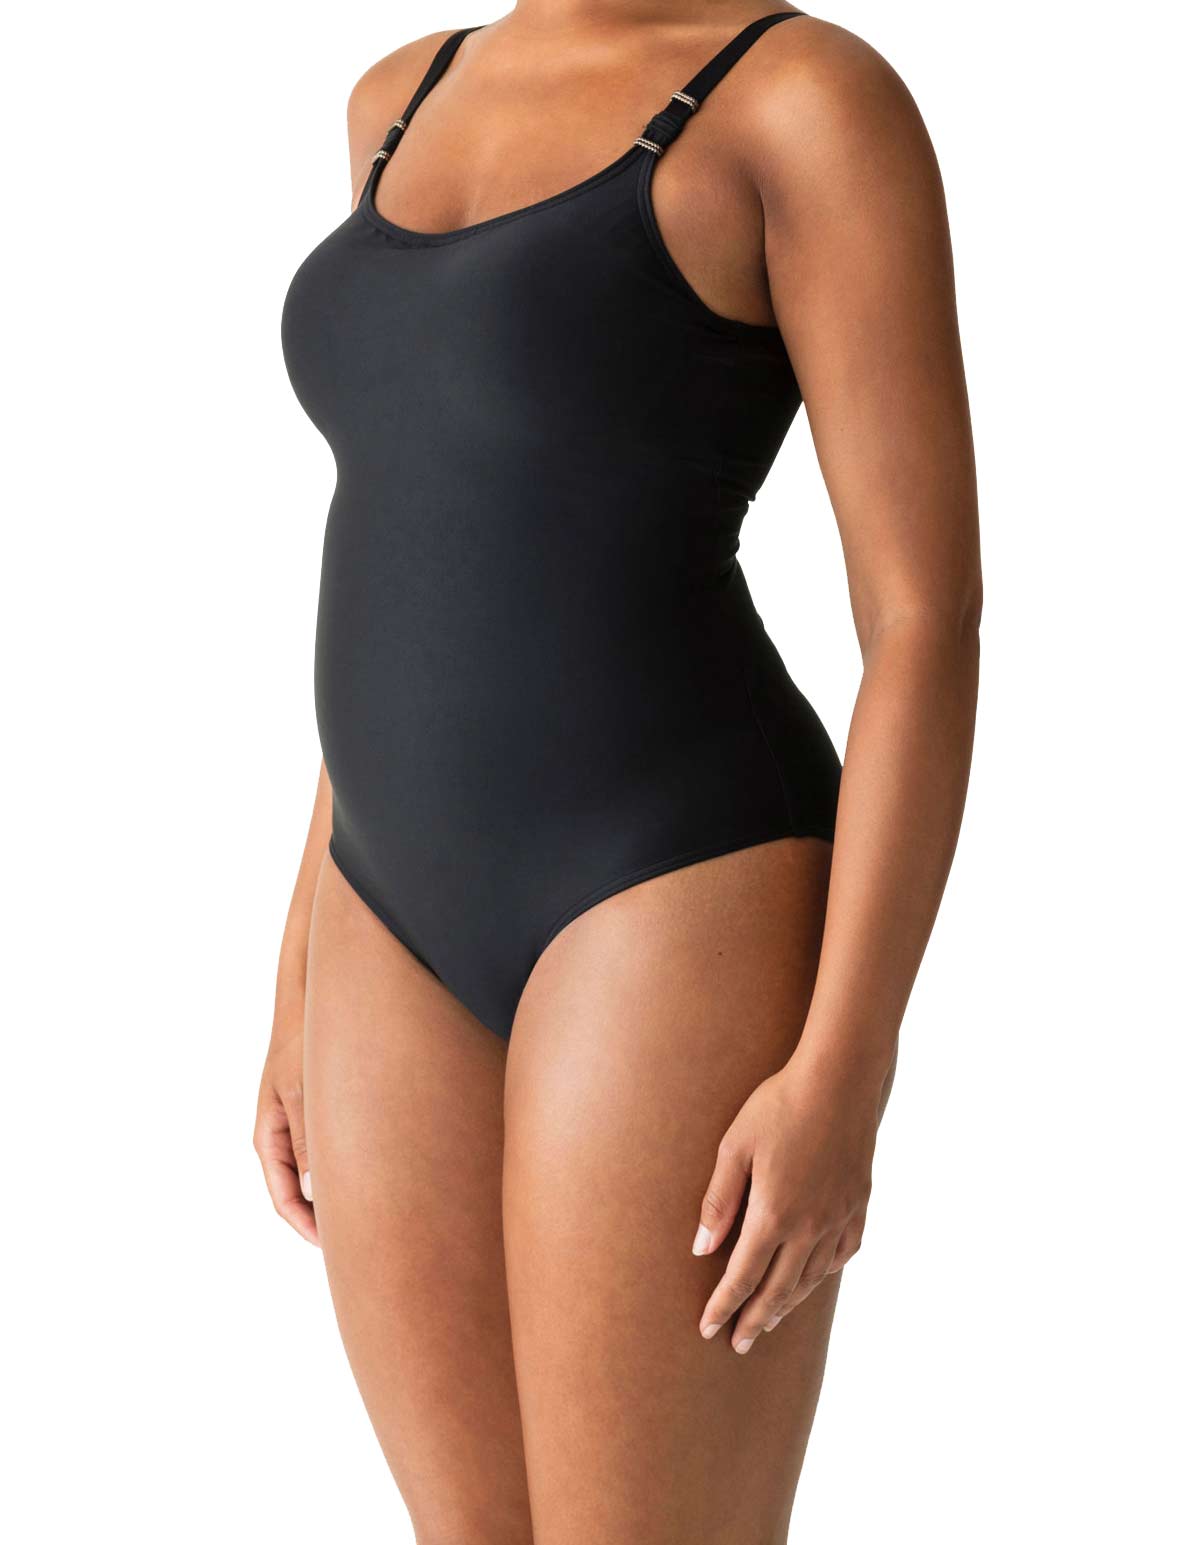 PrimaDonna Cocktail 4000138-ZWA Black Padded Non-Wired Swimsuit